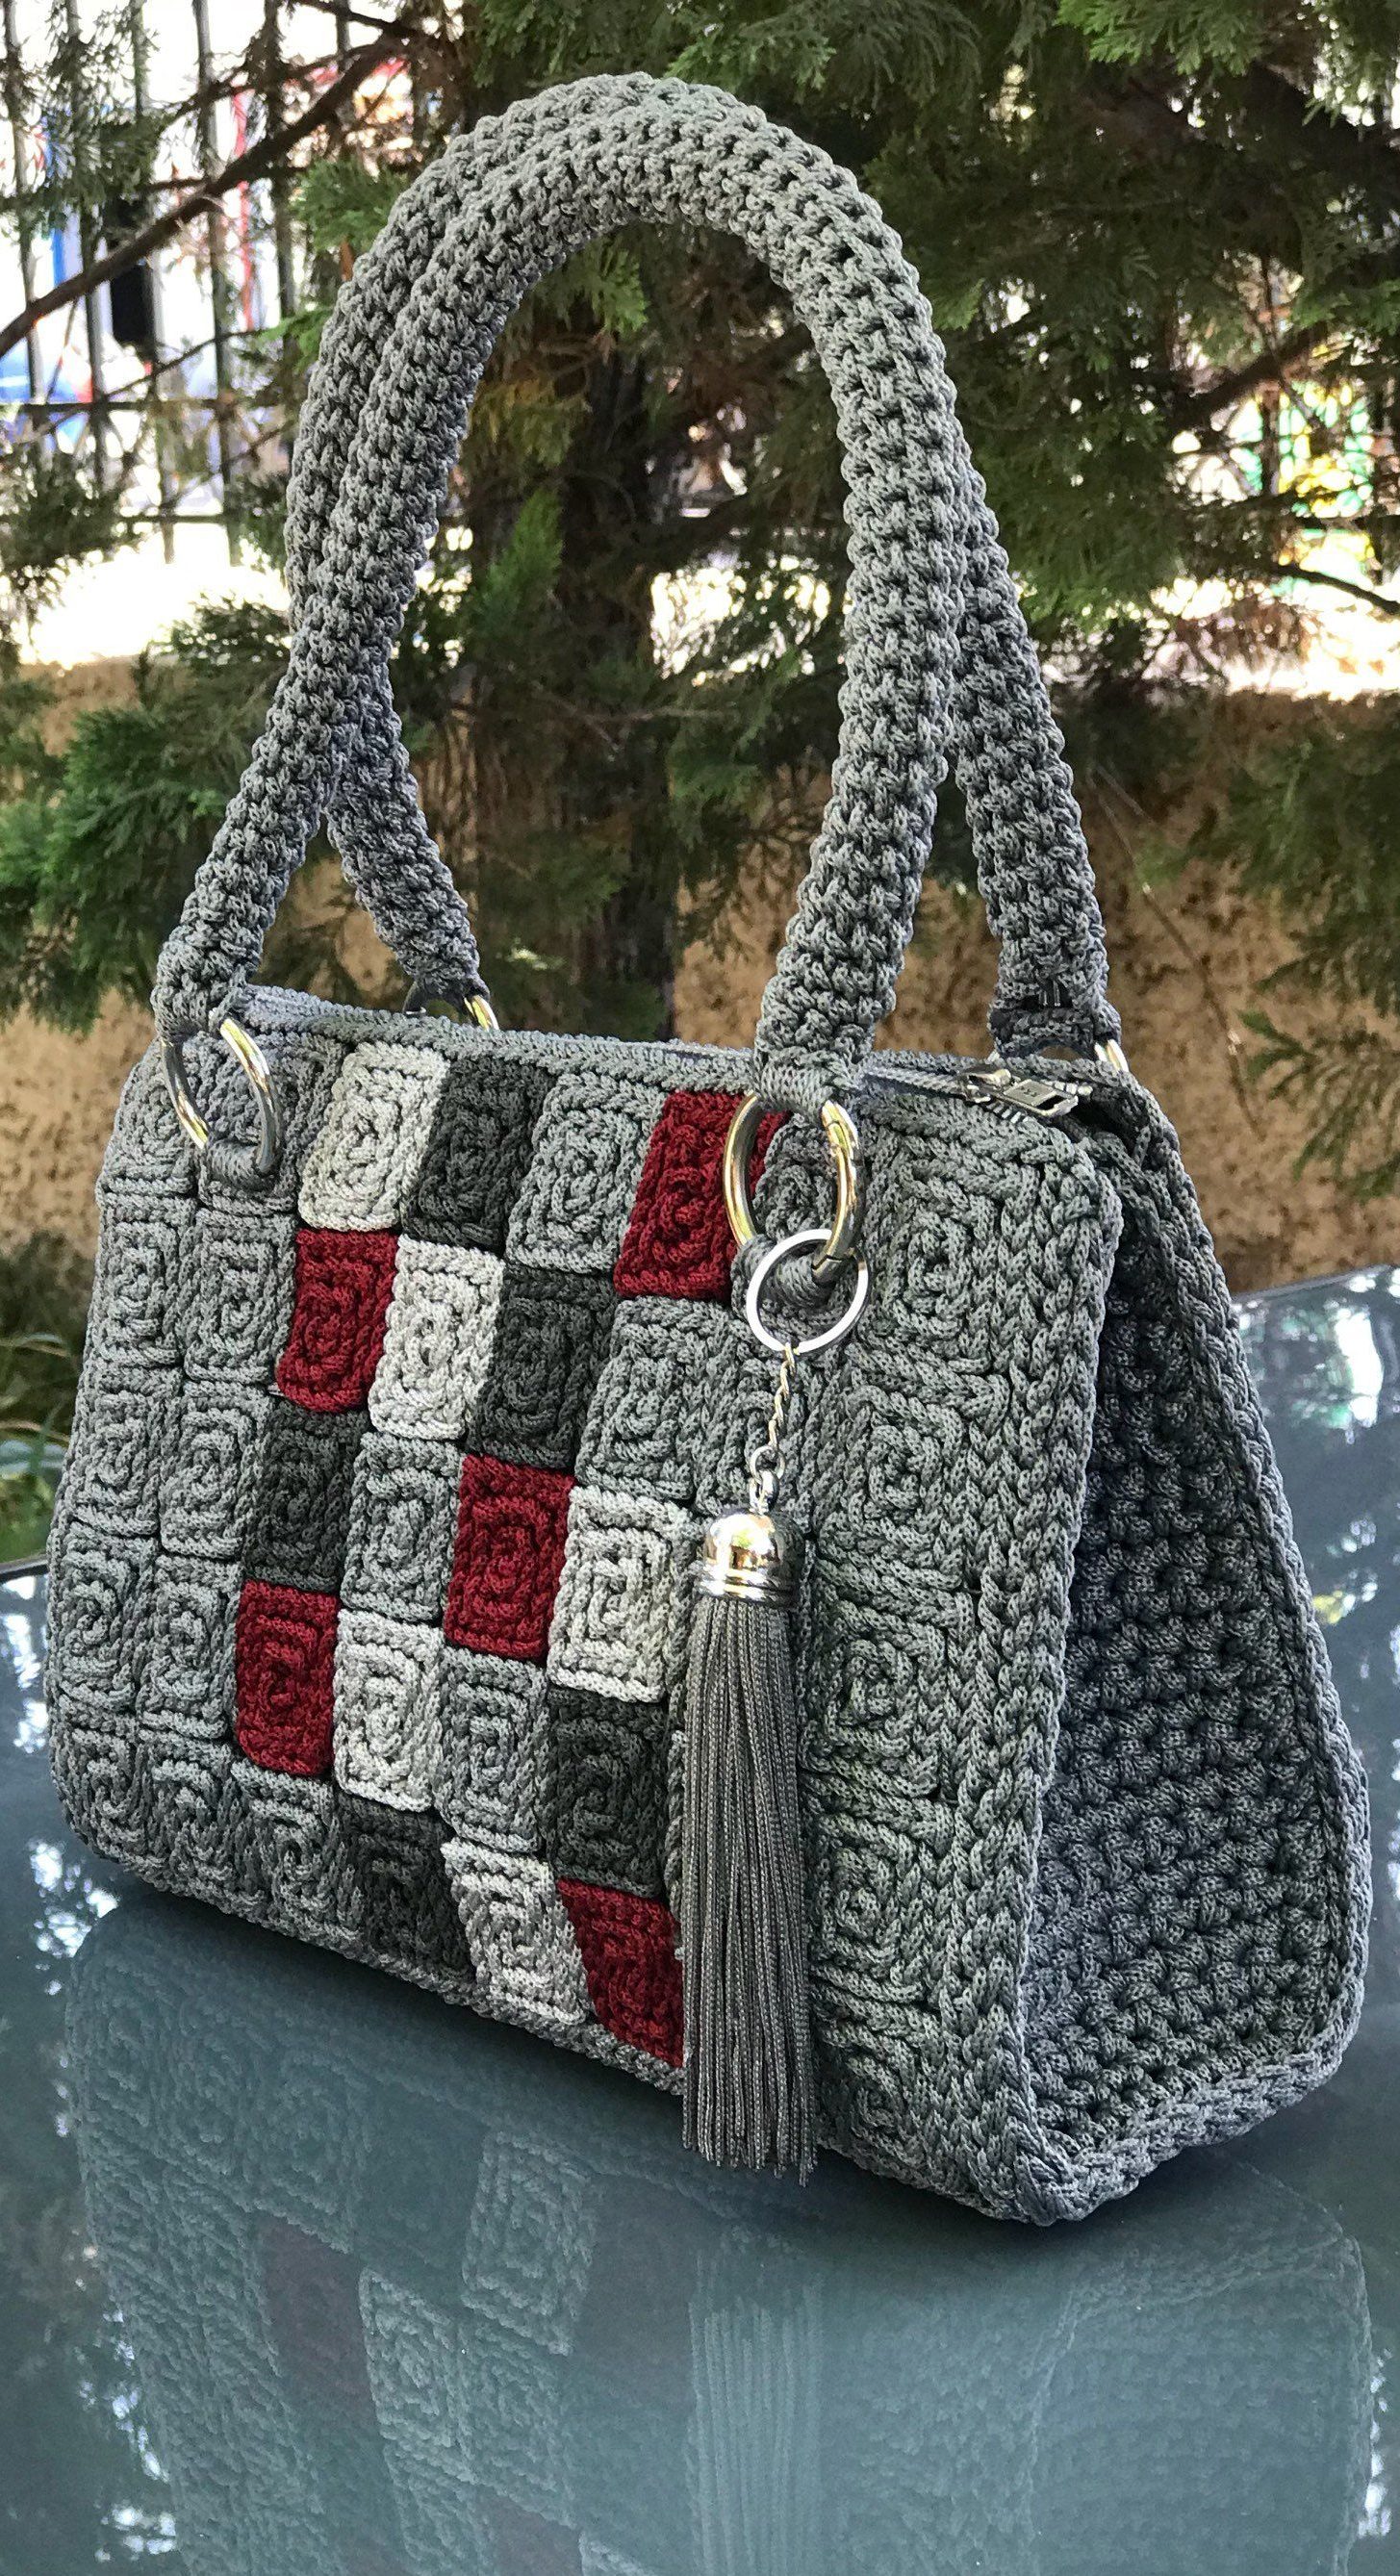 60 Daily Useful and Cool Crochet Bag Pattern Ideas  Page 17 of 60  Beauty Crochet Patterns 